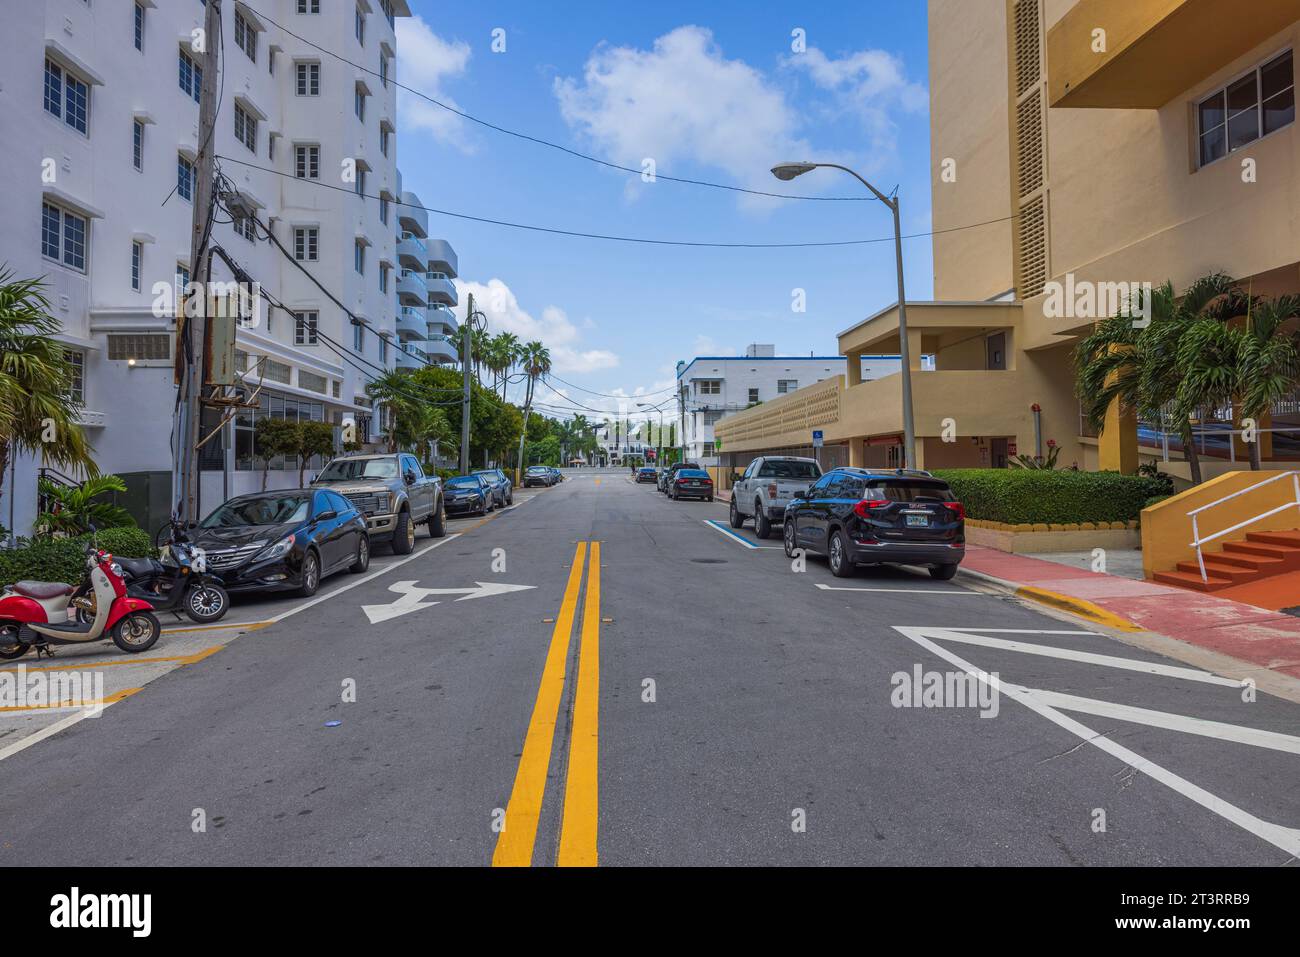 Picturesque cityscape of one of Miami Beach streets with parked cars on both sides, on blue sky with rear white clouds background. Florida, USA. Stock Photo